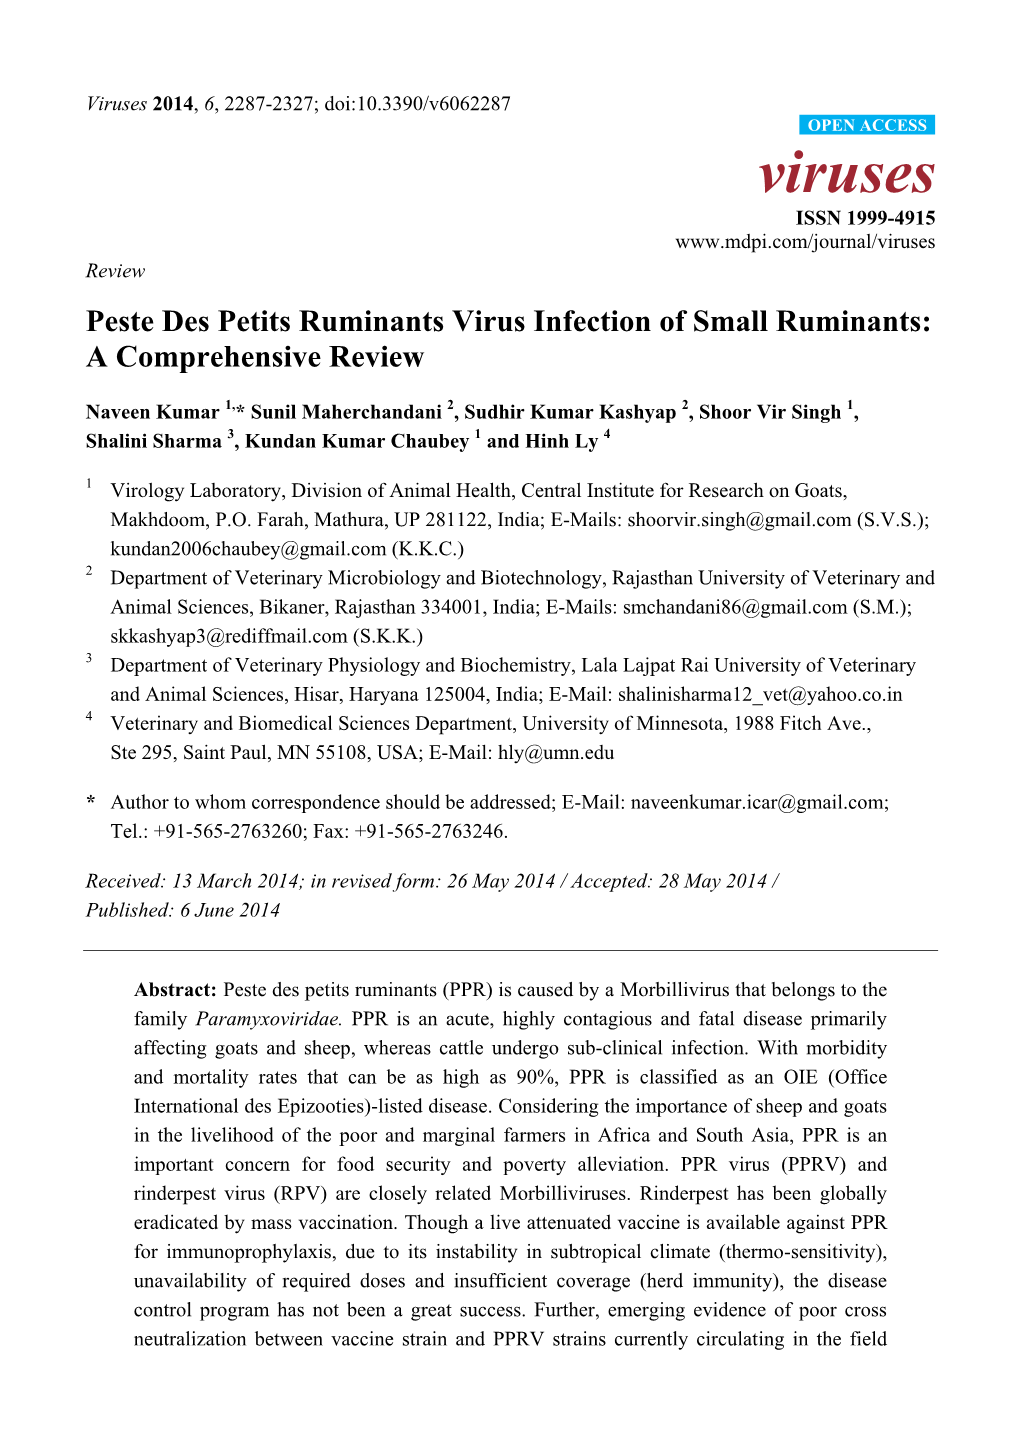 Peste Des Petits Ruminants Virus Infection of Small Ruminants: a Comprehensive Review